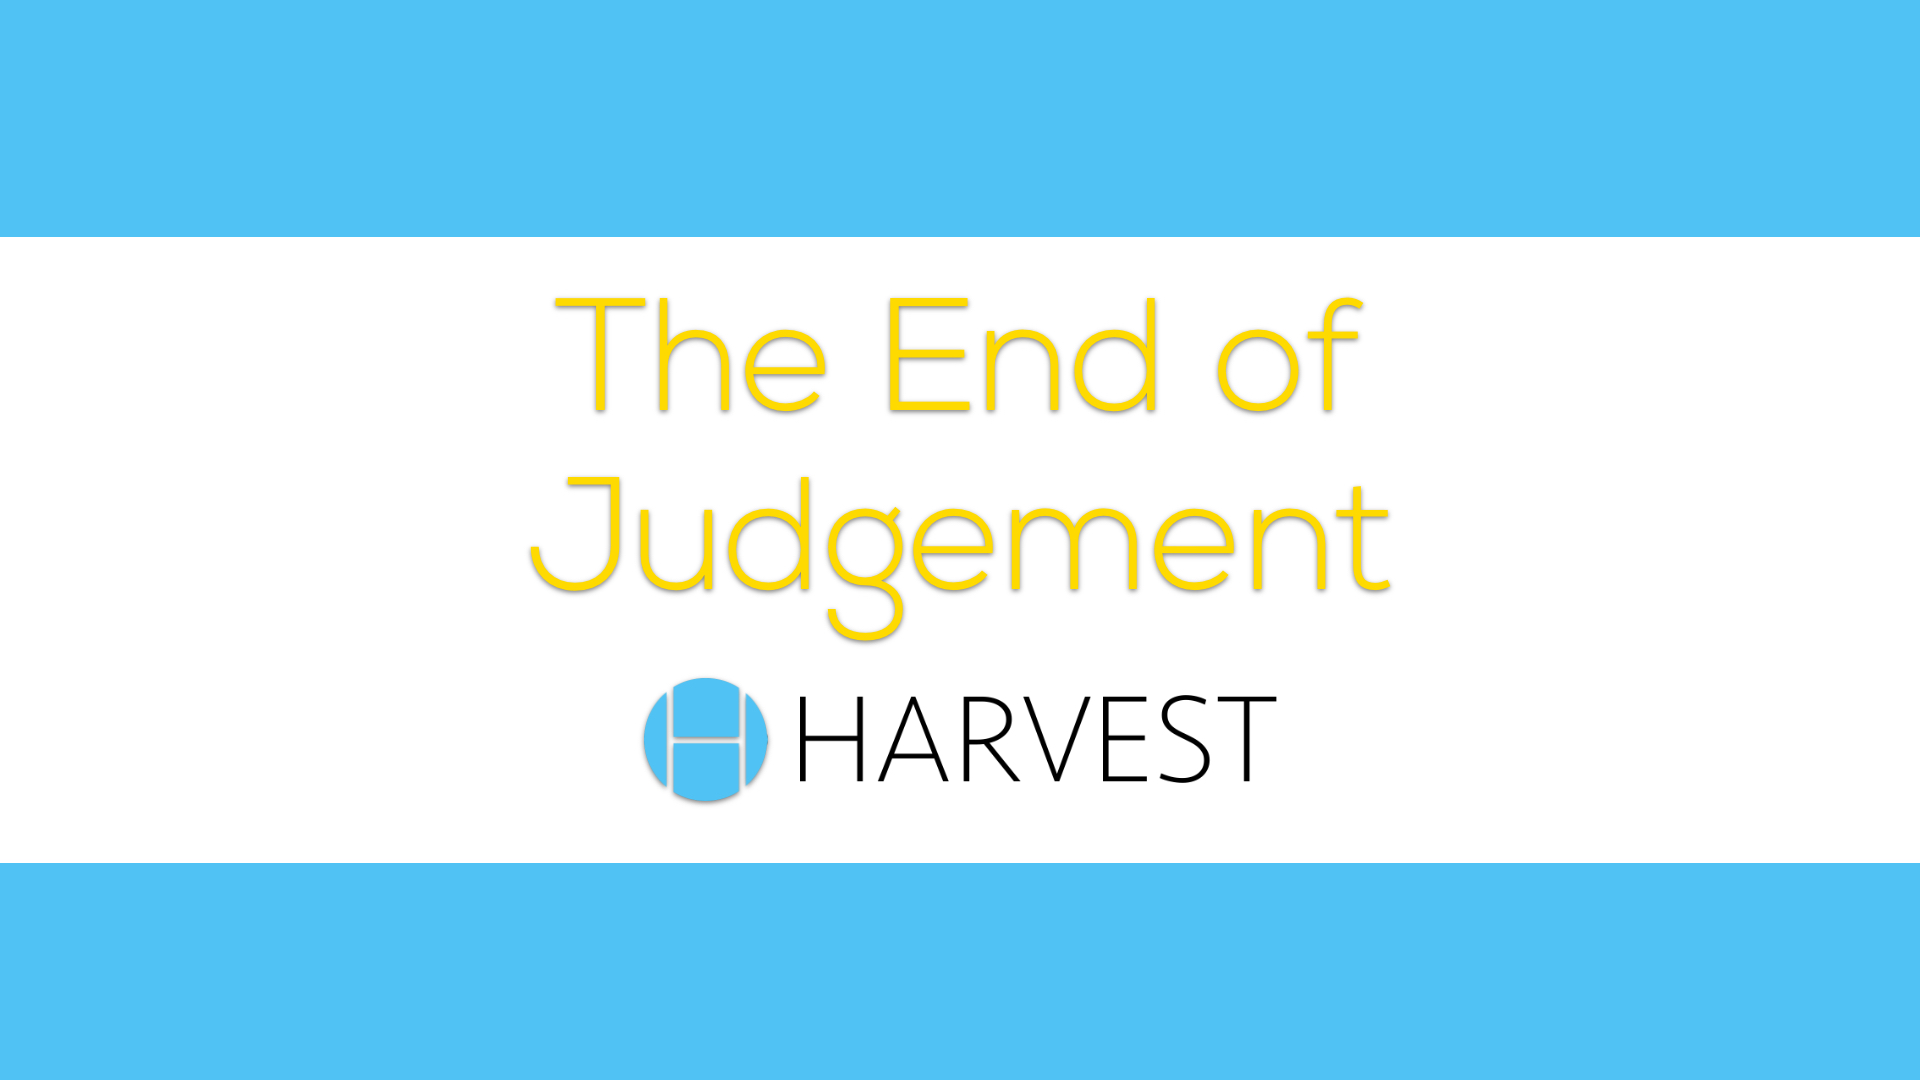 The End of Judgement